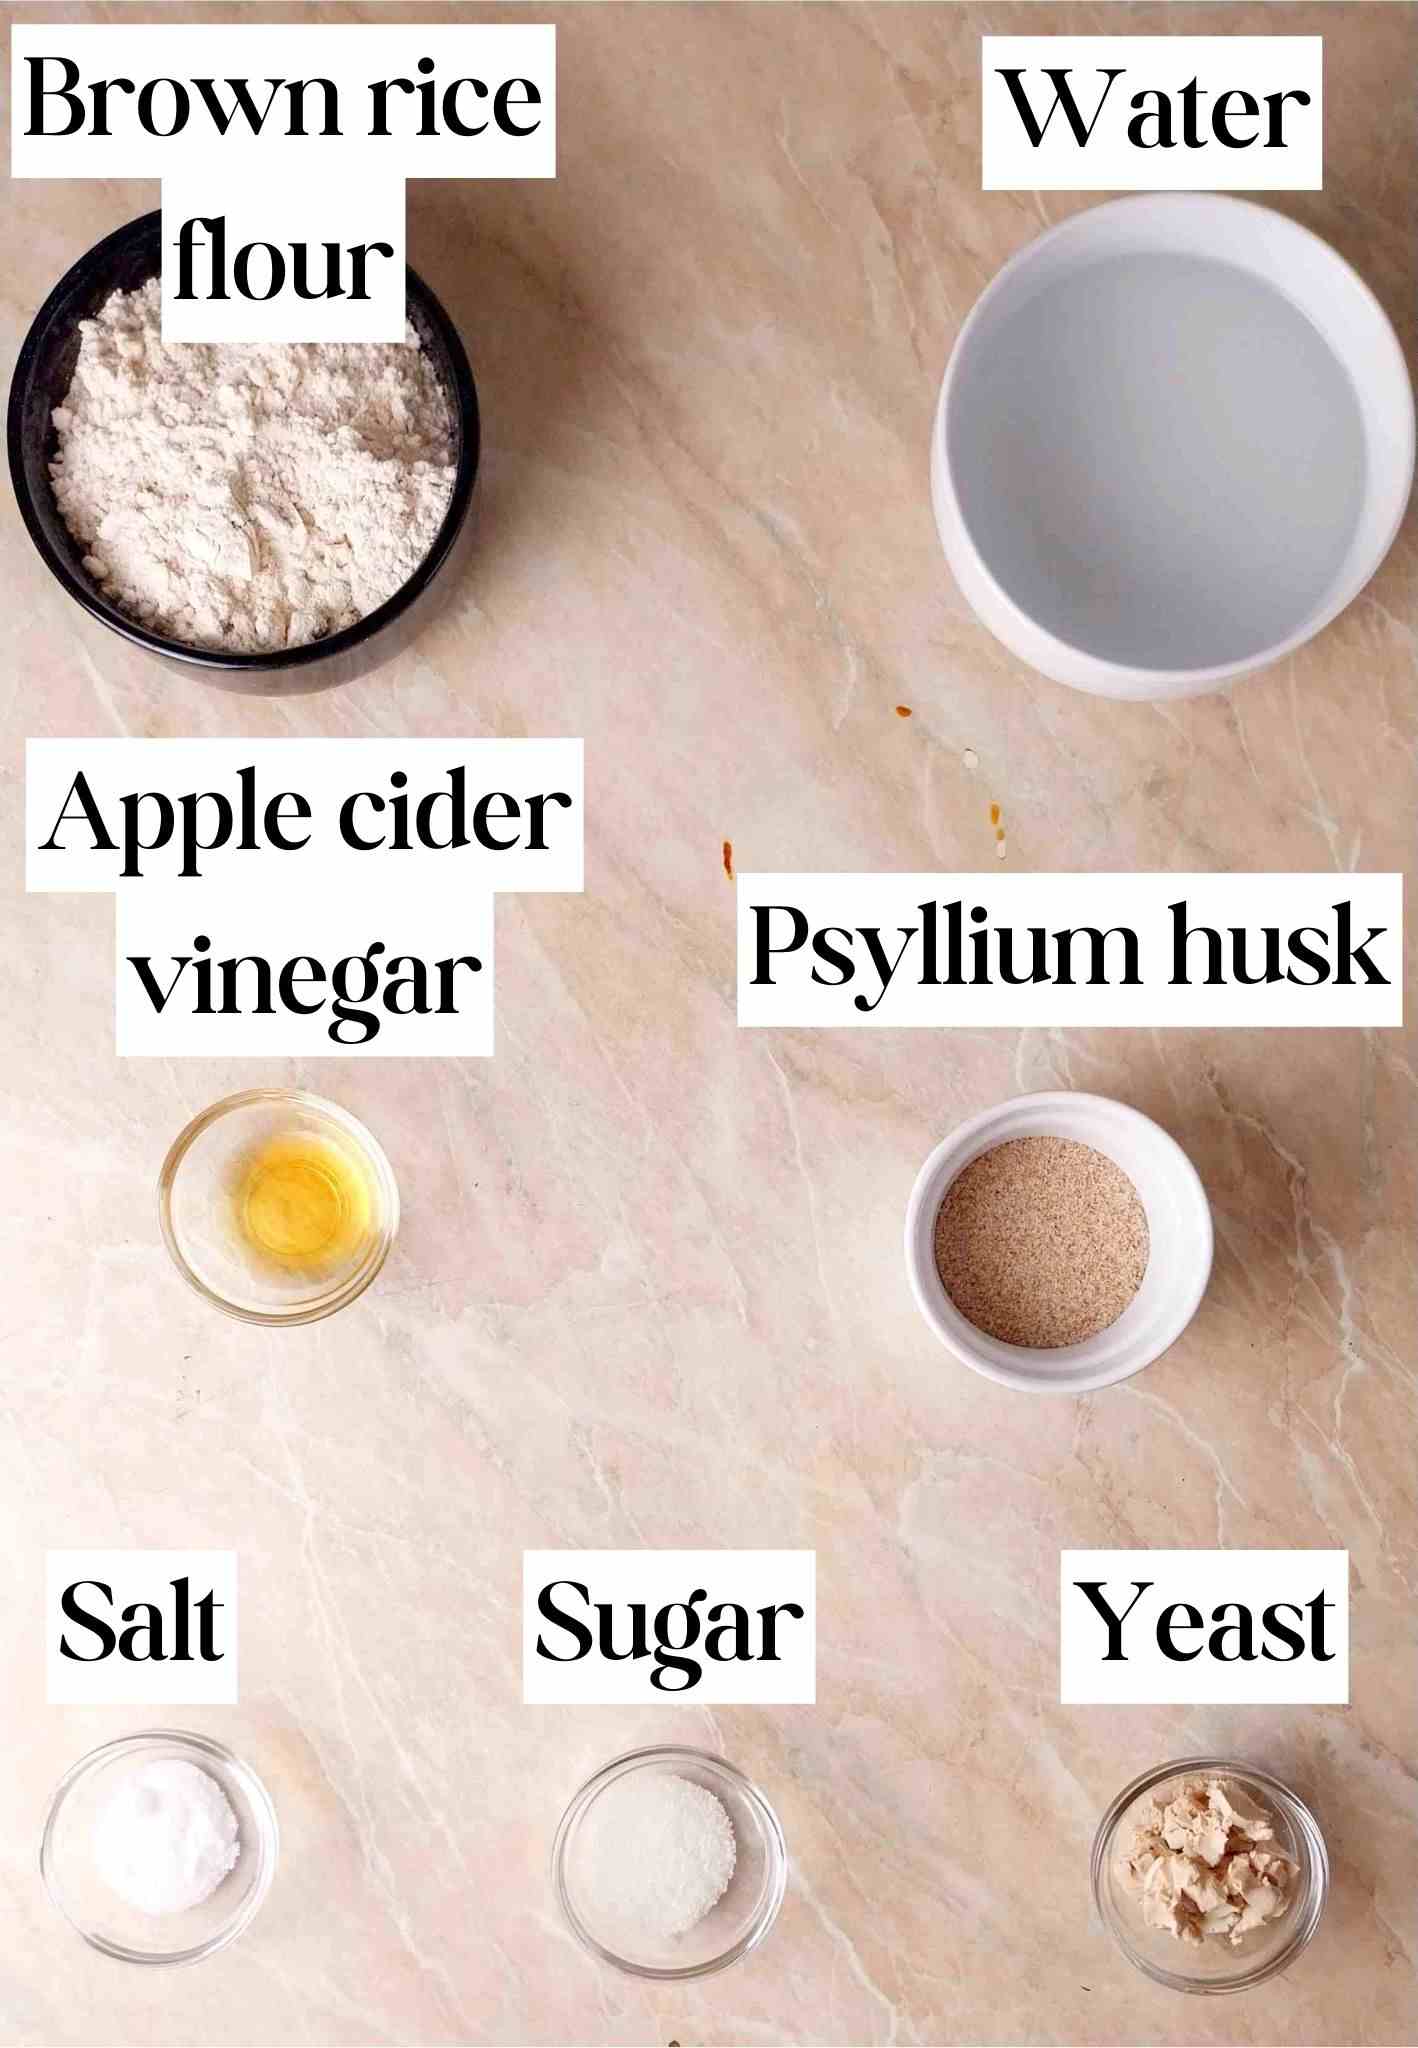 Ingredients in small bowls on a kitchen counter.